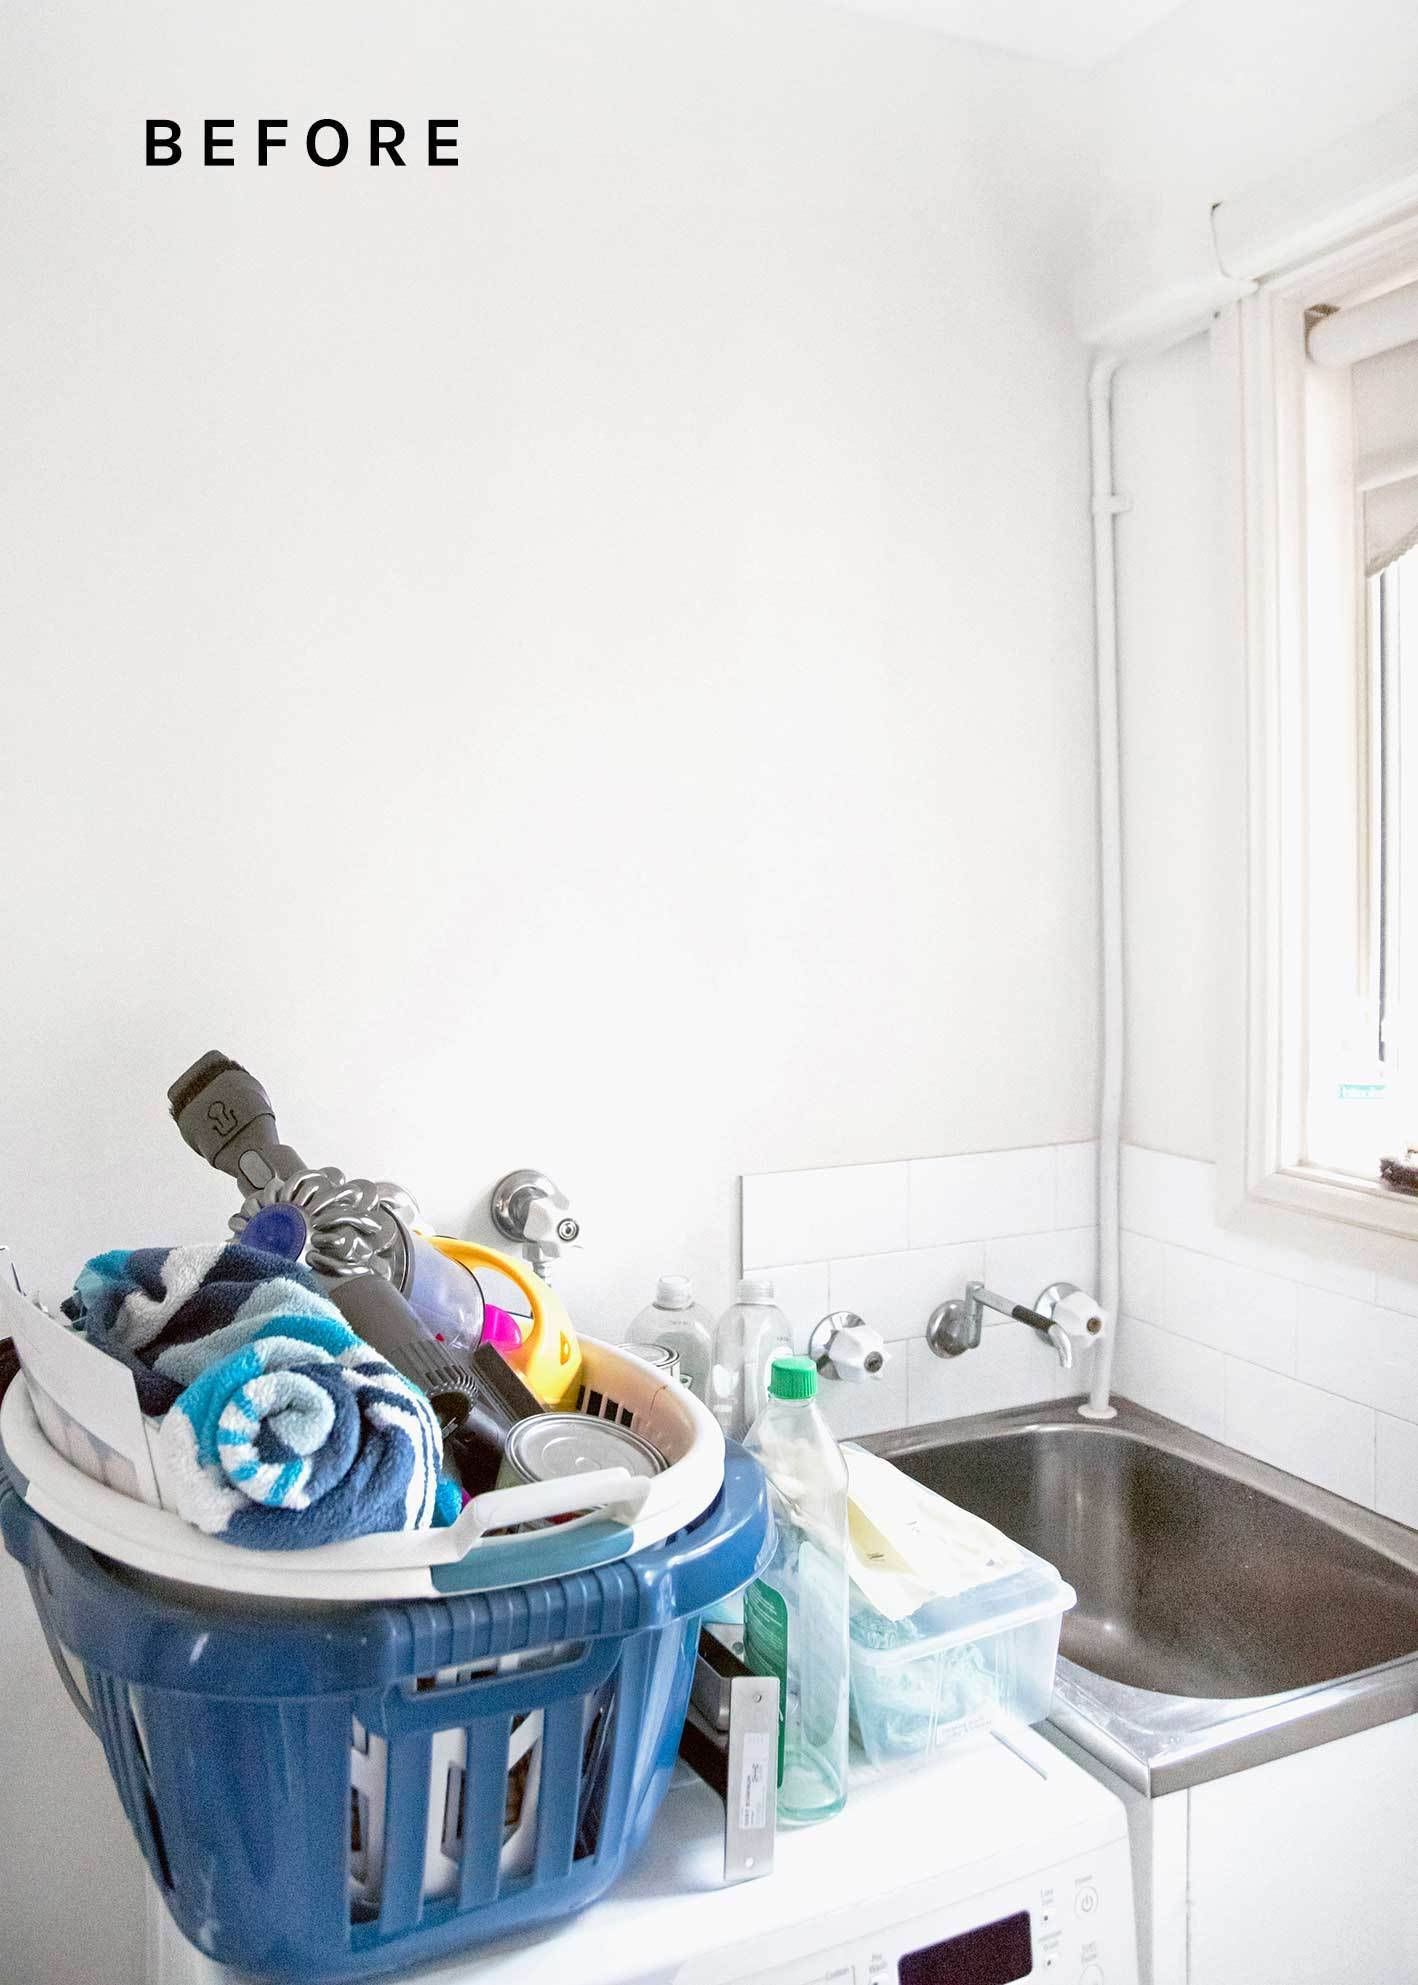 Before we applied laundry room storage ideas to our cluttered utility room